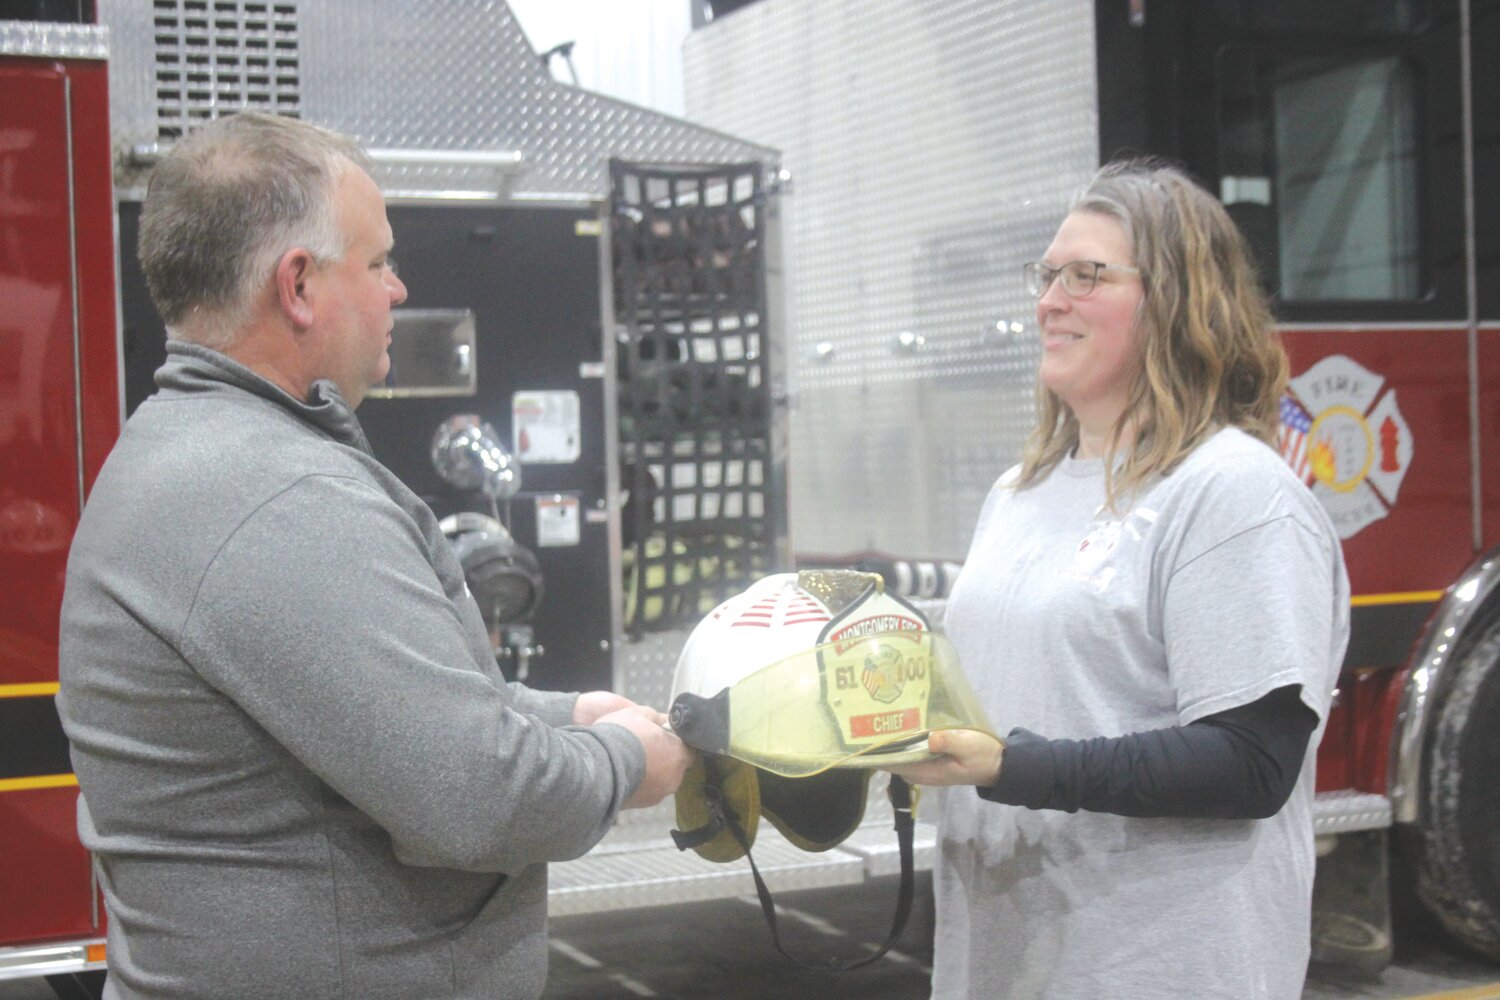 Keith Reynolds hands over the fire chief hat to Jessica Davis during an installation ceremony on Jan. 27 at the Montgomery Fire Protection District building. Davis takes over fire chief duties for Reynolds, who is retiring after 15 years.